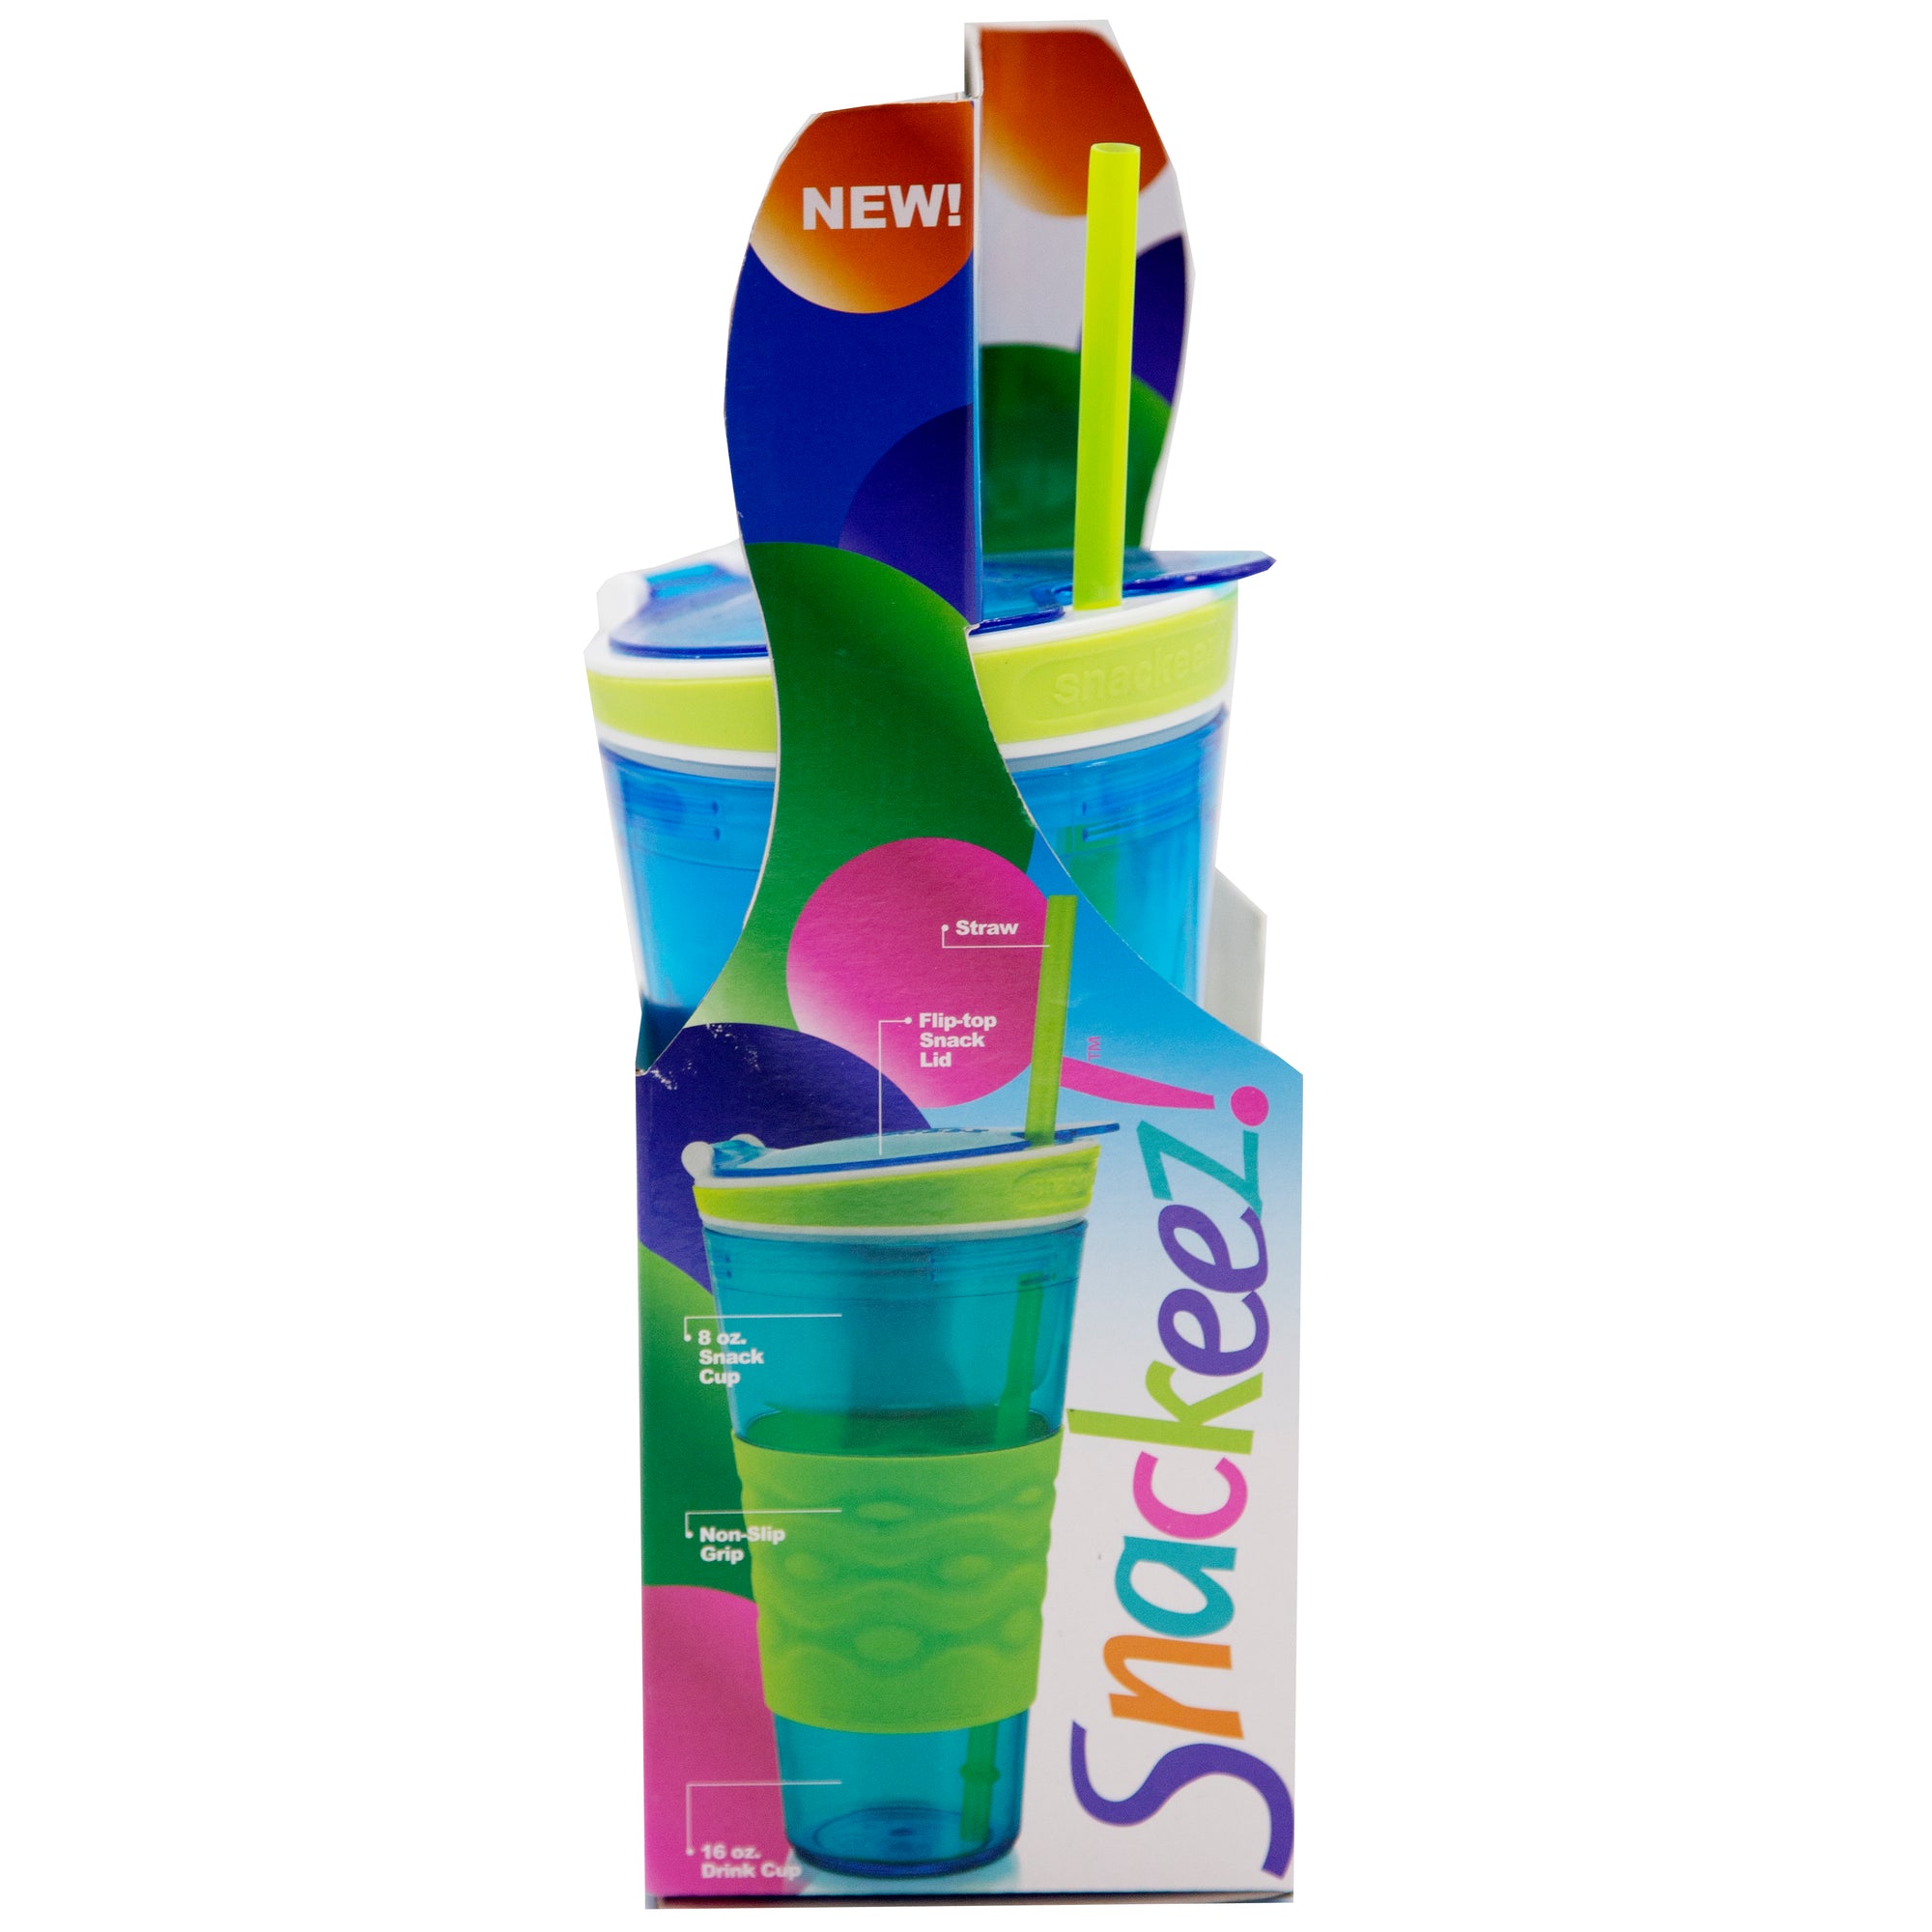  Snackeez Travel Snack & Drink Cup with Straw, Blue,16 oz : Baby